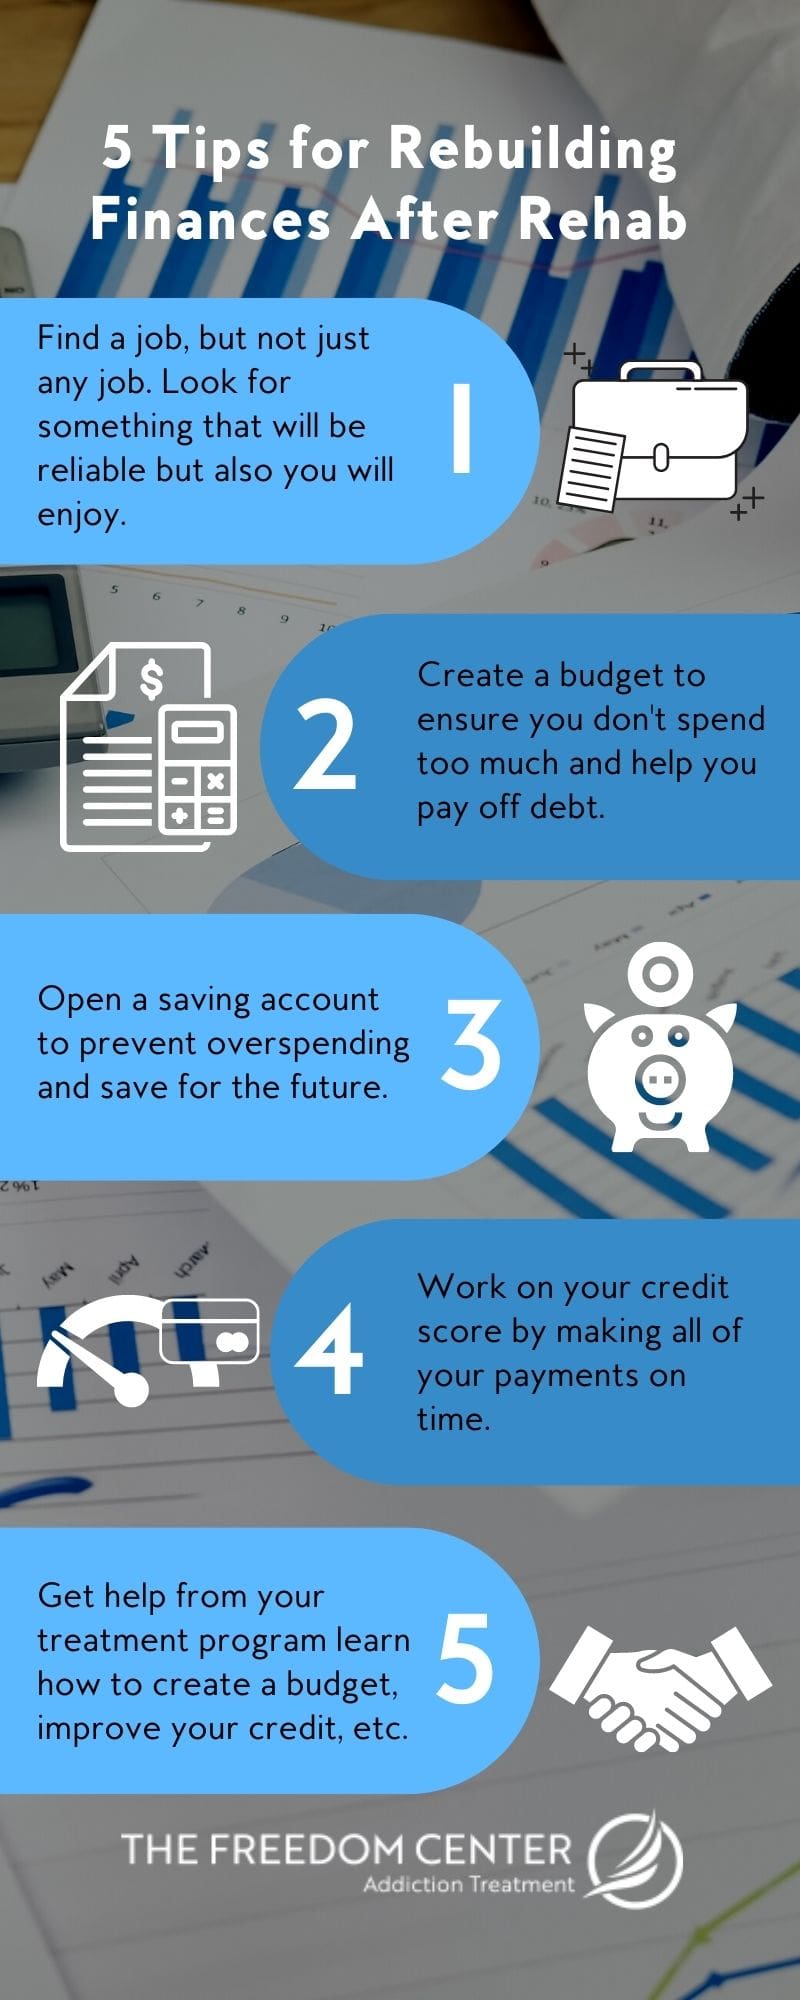 An infographic titled, "5 Tips for rebuilding Finances After Rehab".